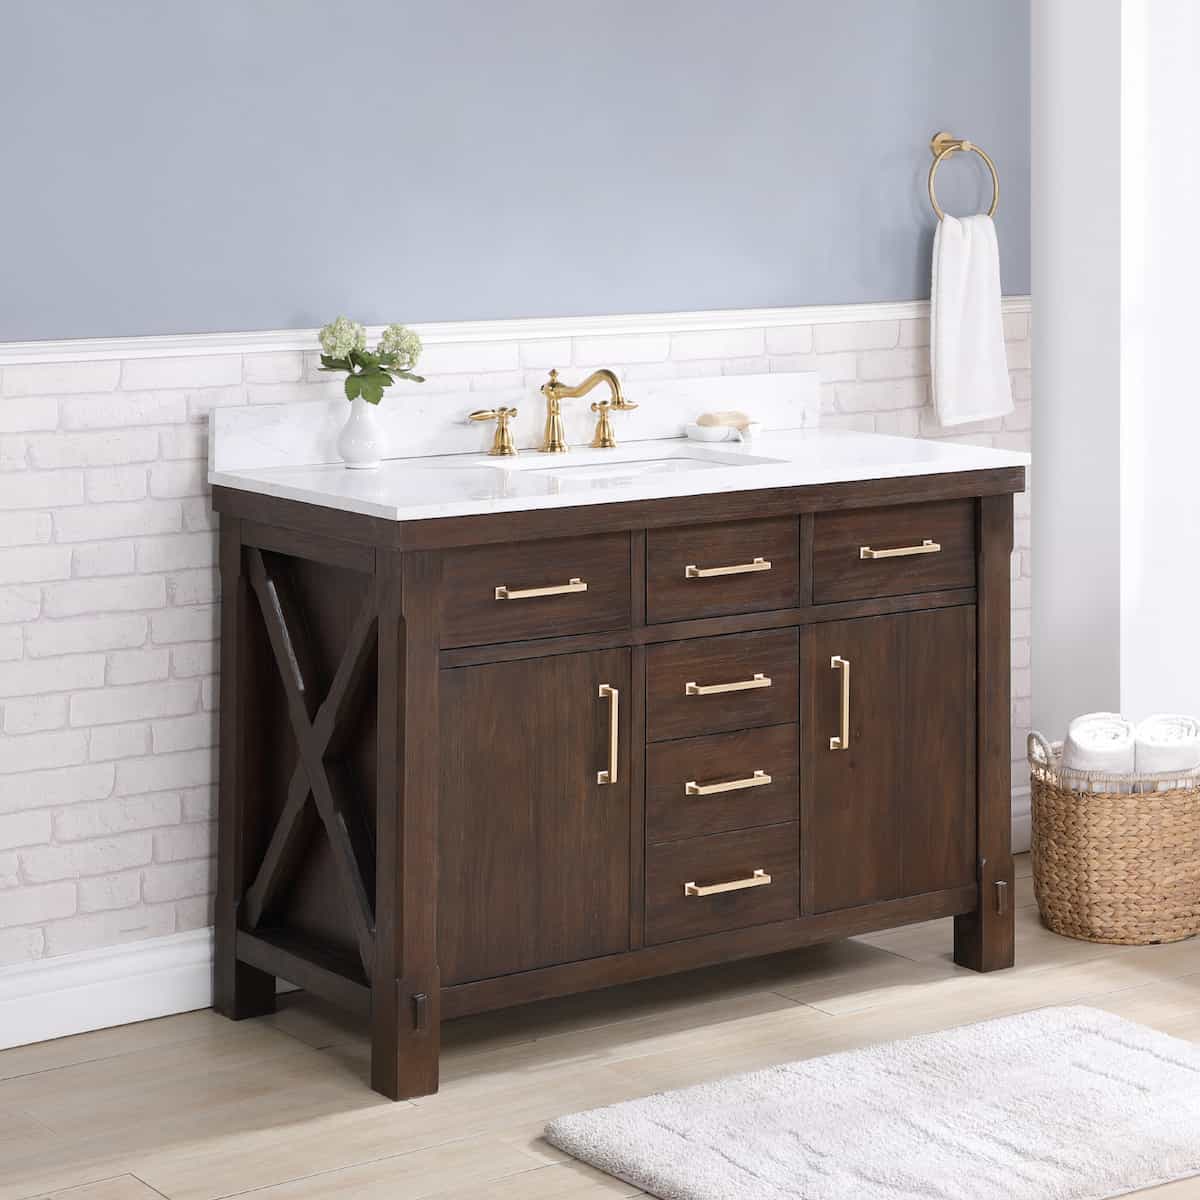 Vinnova Viella 48 Inch Freestanding Single Sink Bath Vanity in Deep Walnut Finish with White Composite Countertop Without Mirror Side 701848-DW-WS-NM